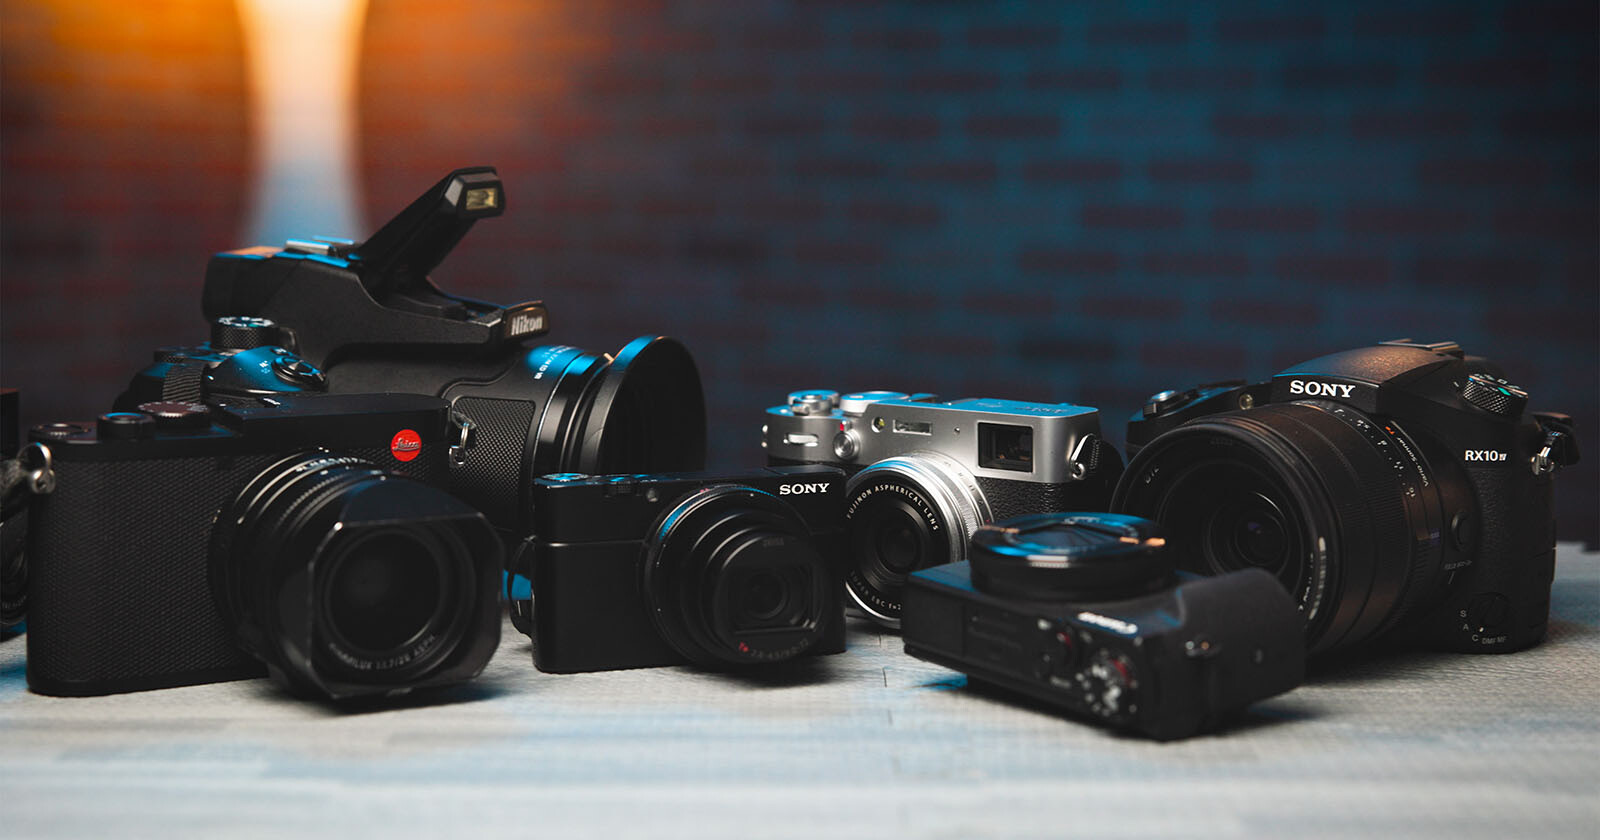 The Most Rented Point and Shoot Cameras of the Last Year